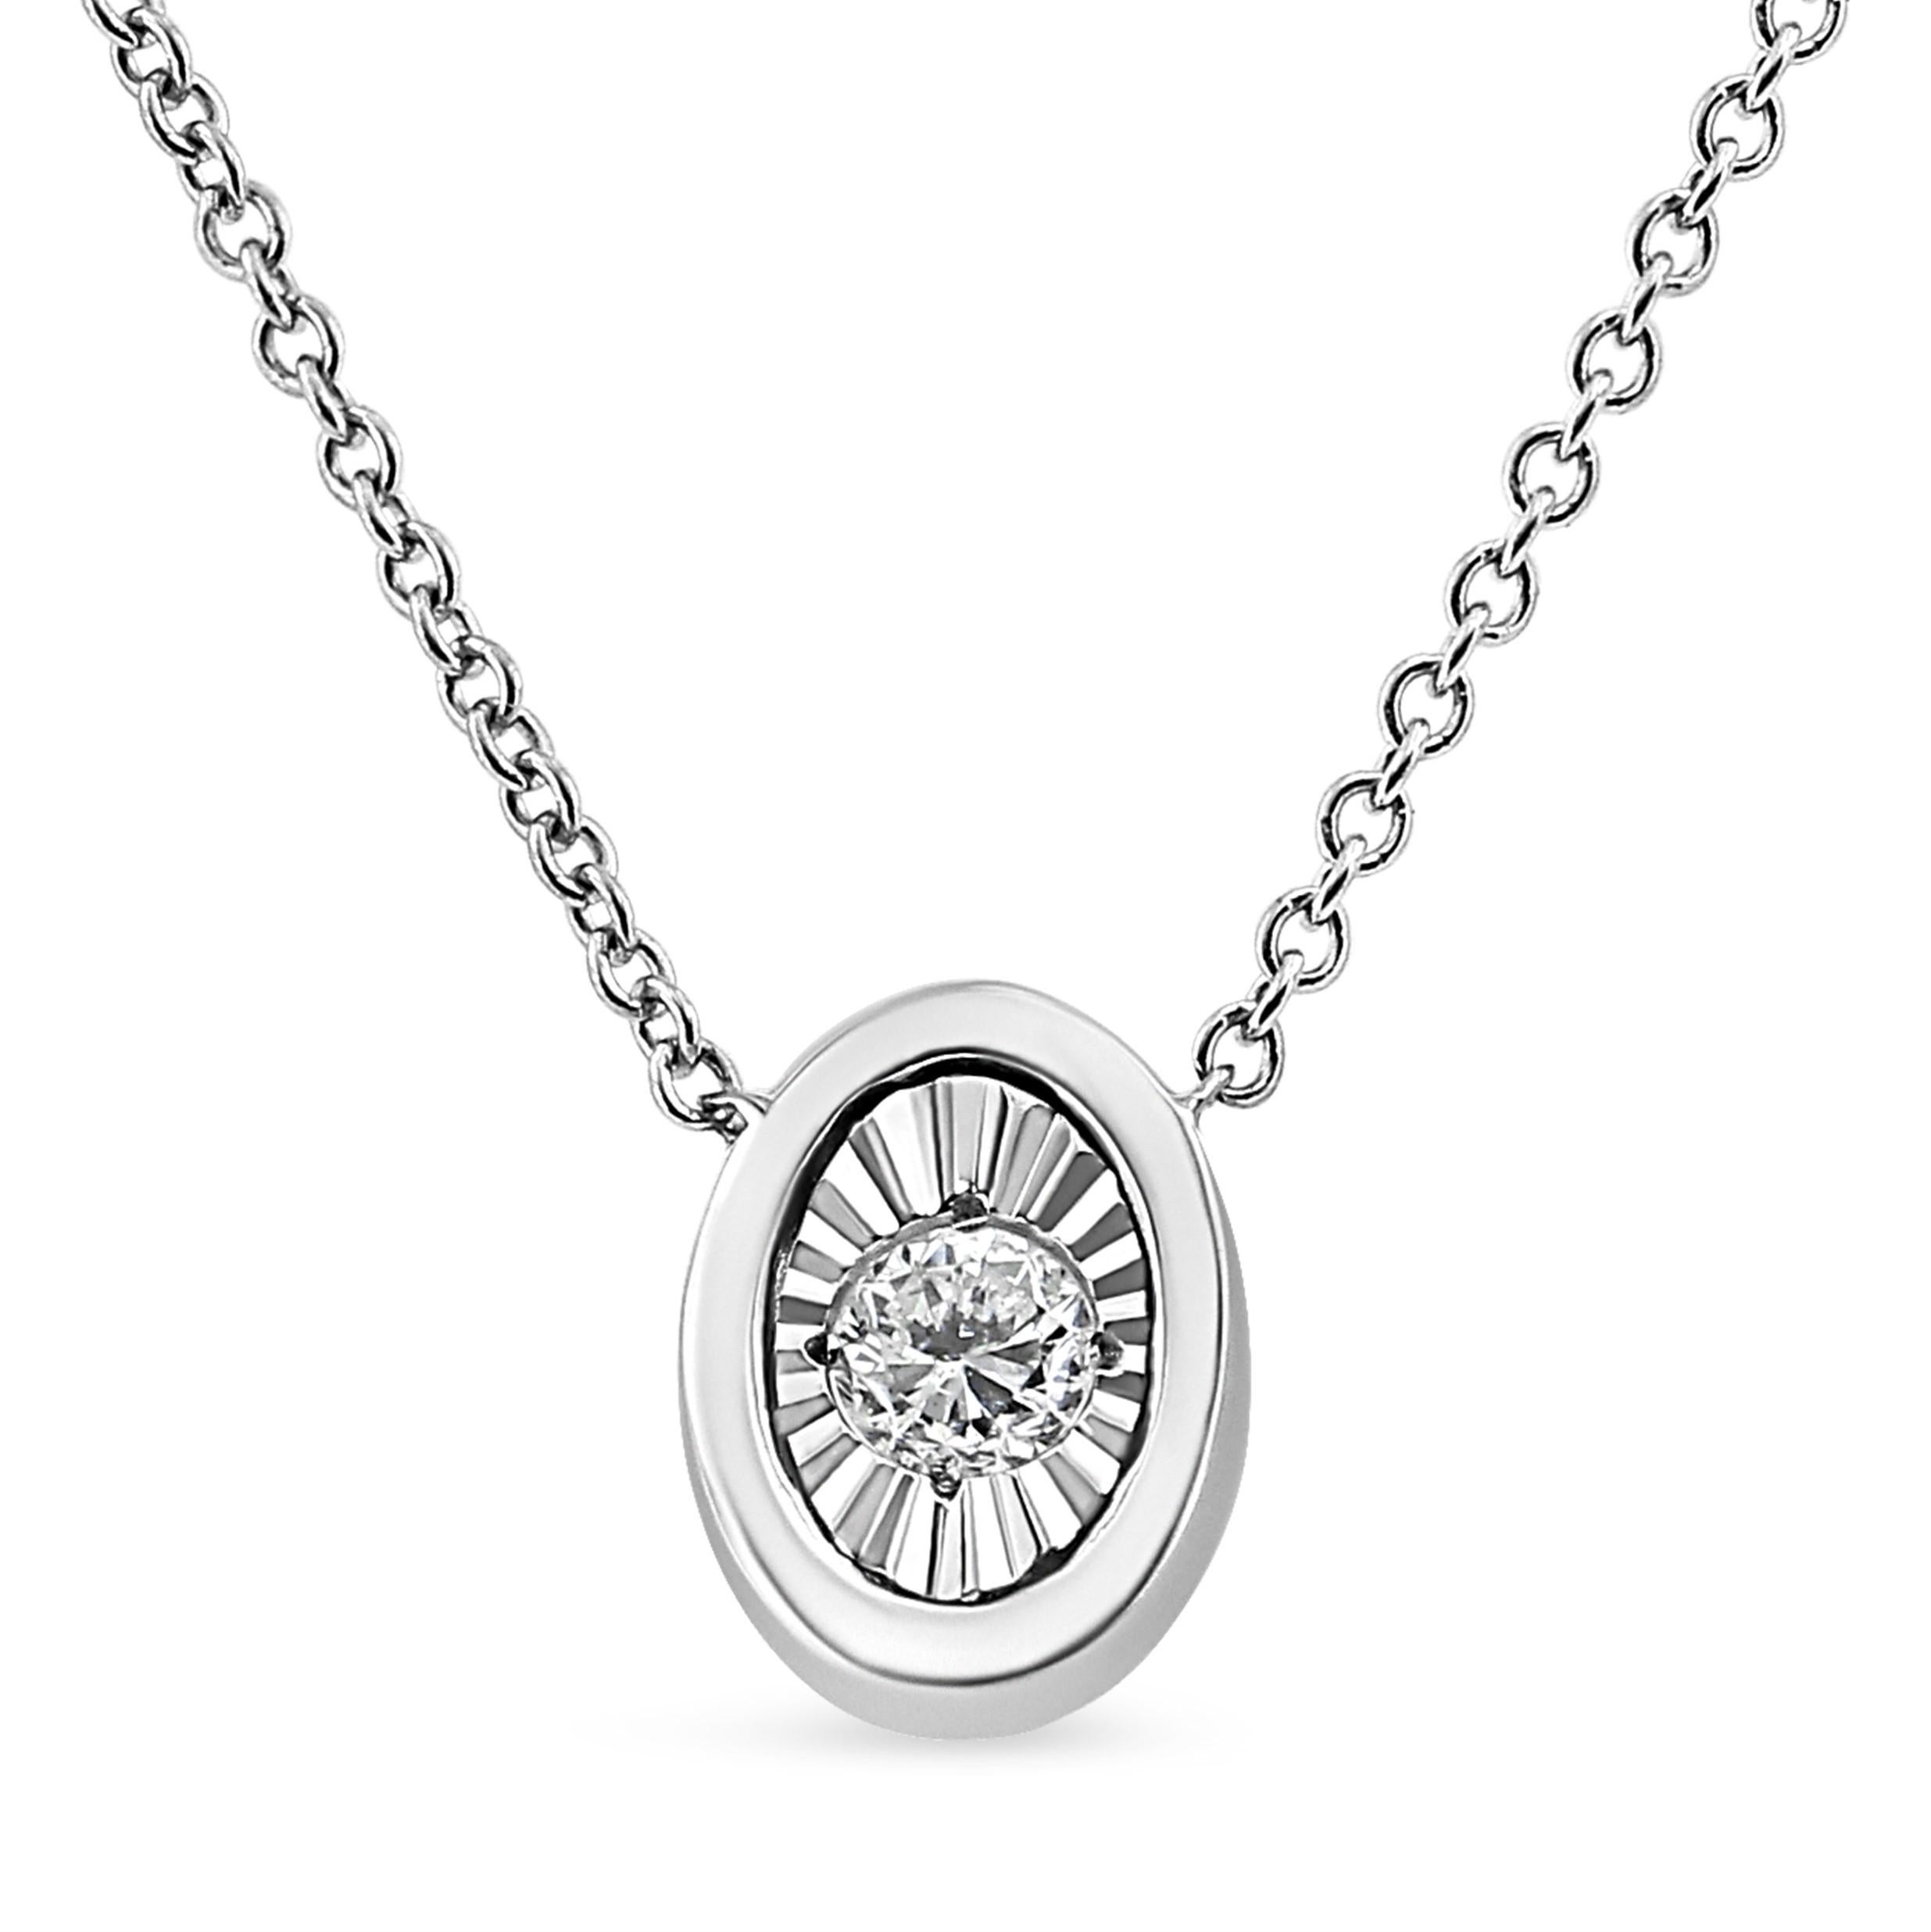 Haven’t we all had the dream of getting ready like a queen for that special day. This oval shaped diamond pendant necklace is designed for that queen in you. This 10k white gold pendant is studded with a single 1/10 carat round-cut diamond and is a